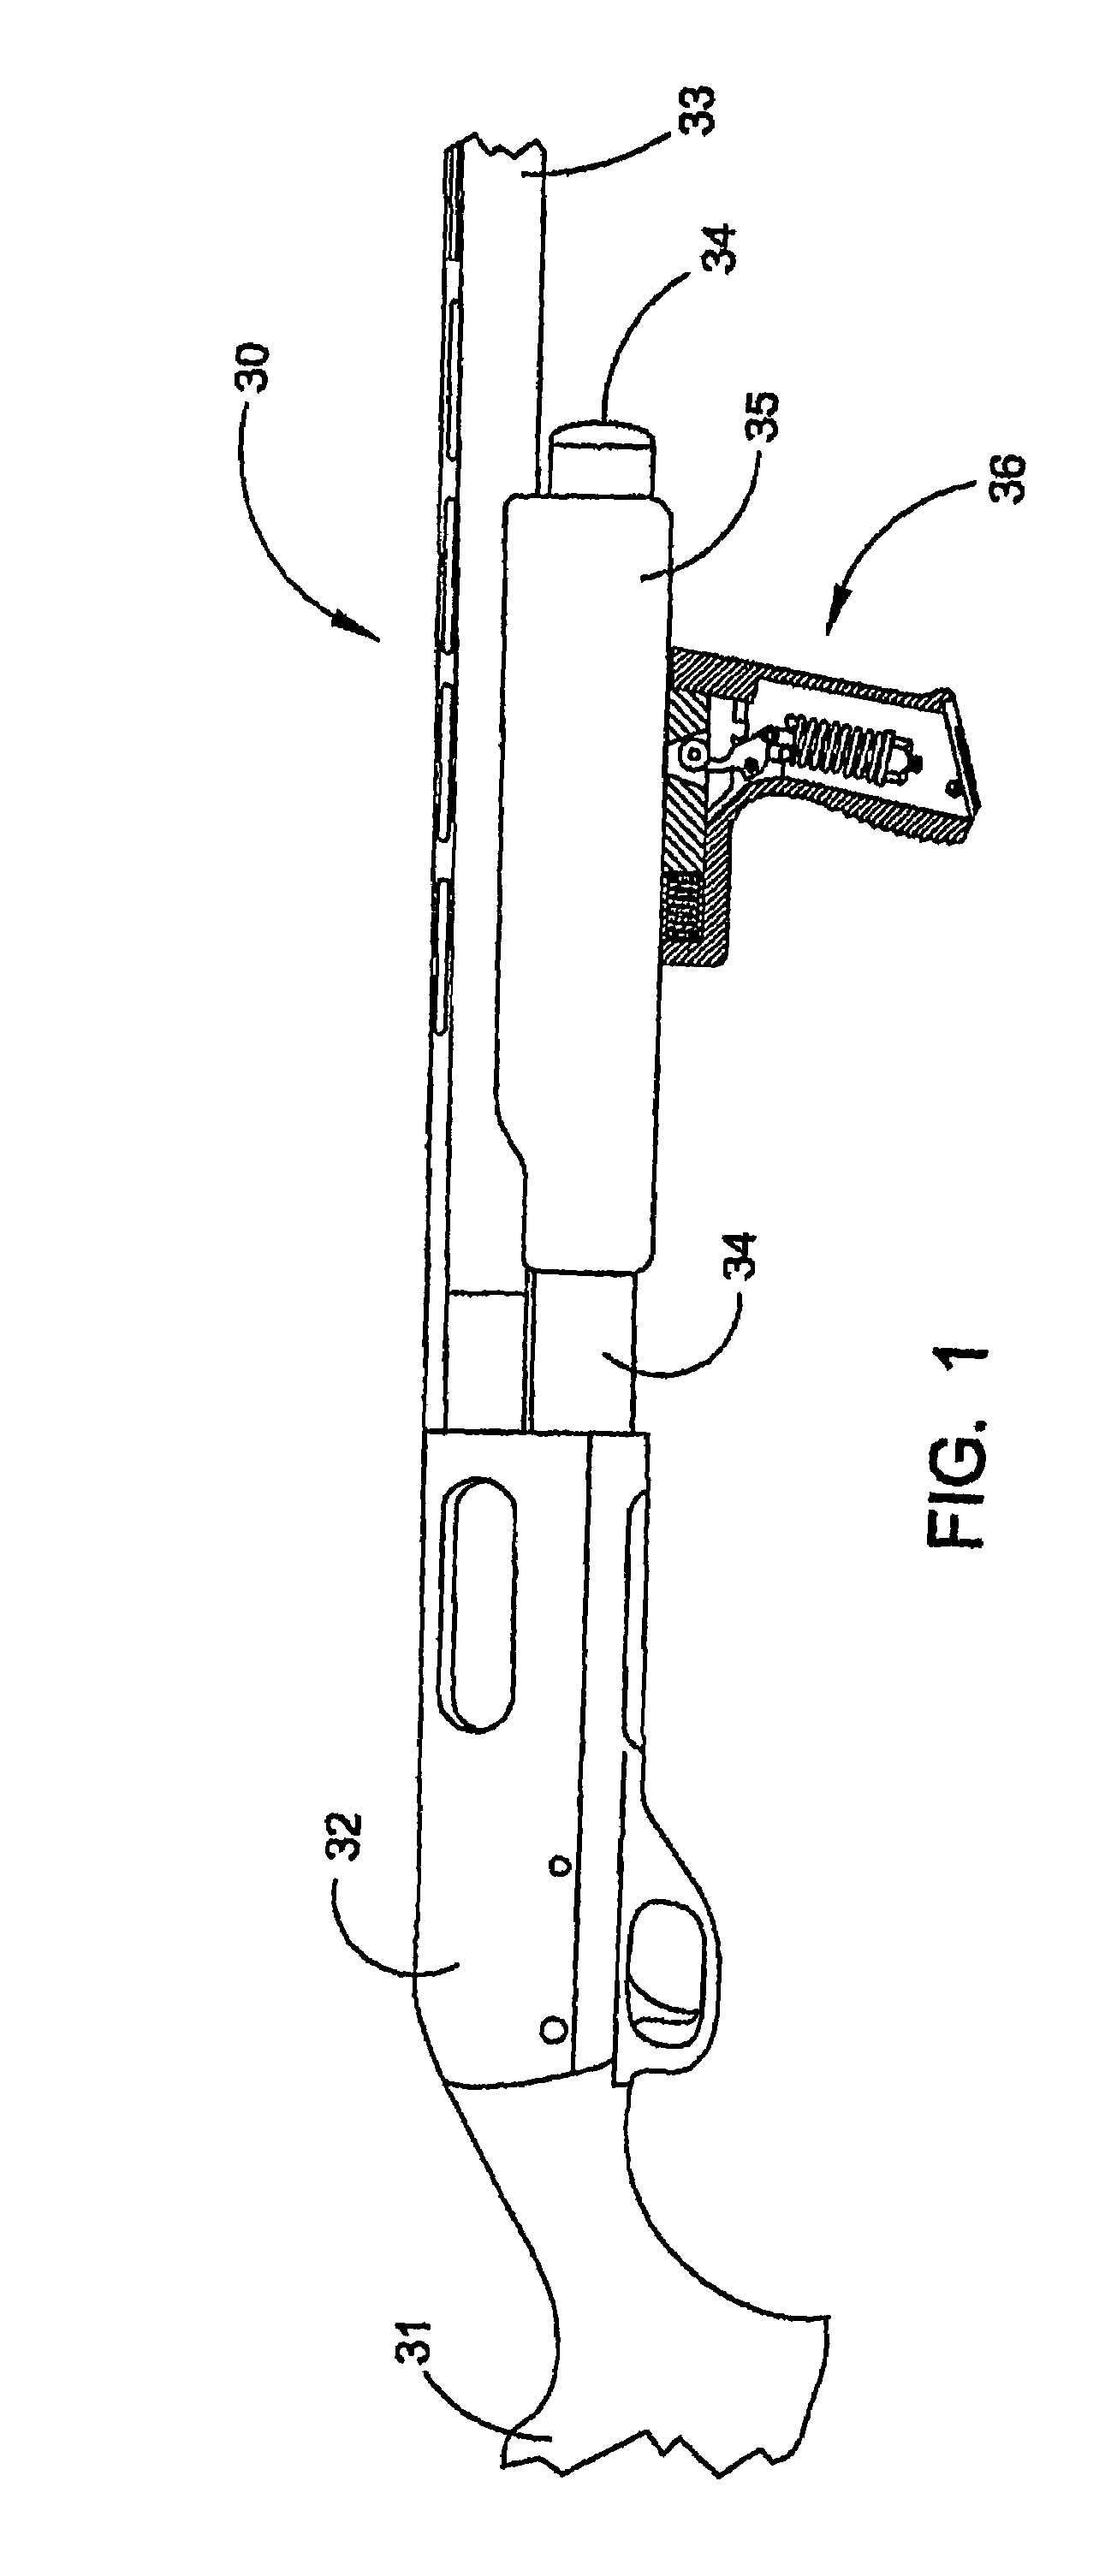 Recoil system